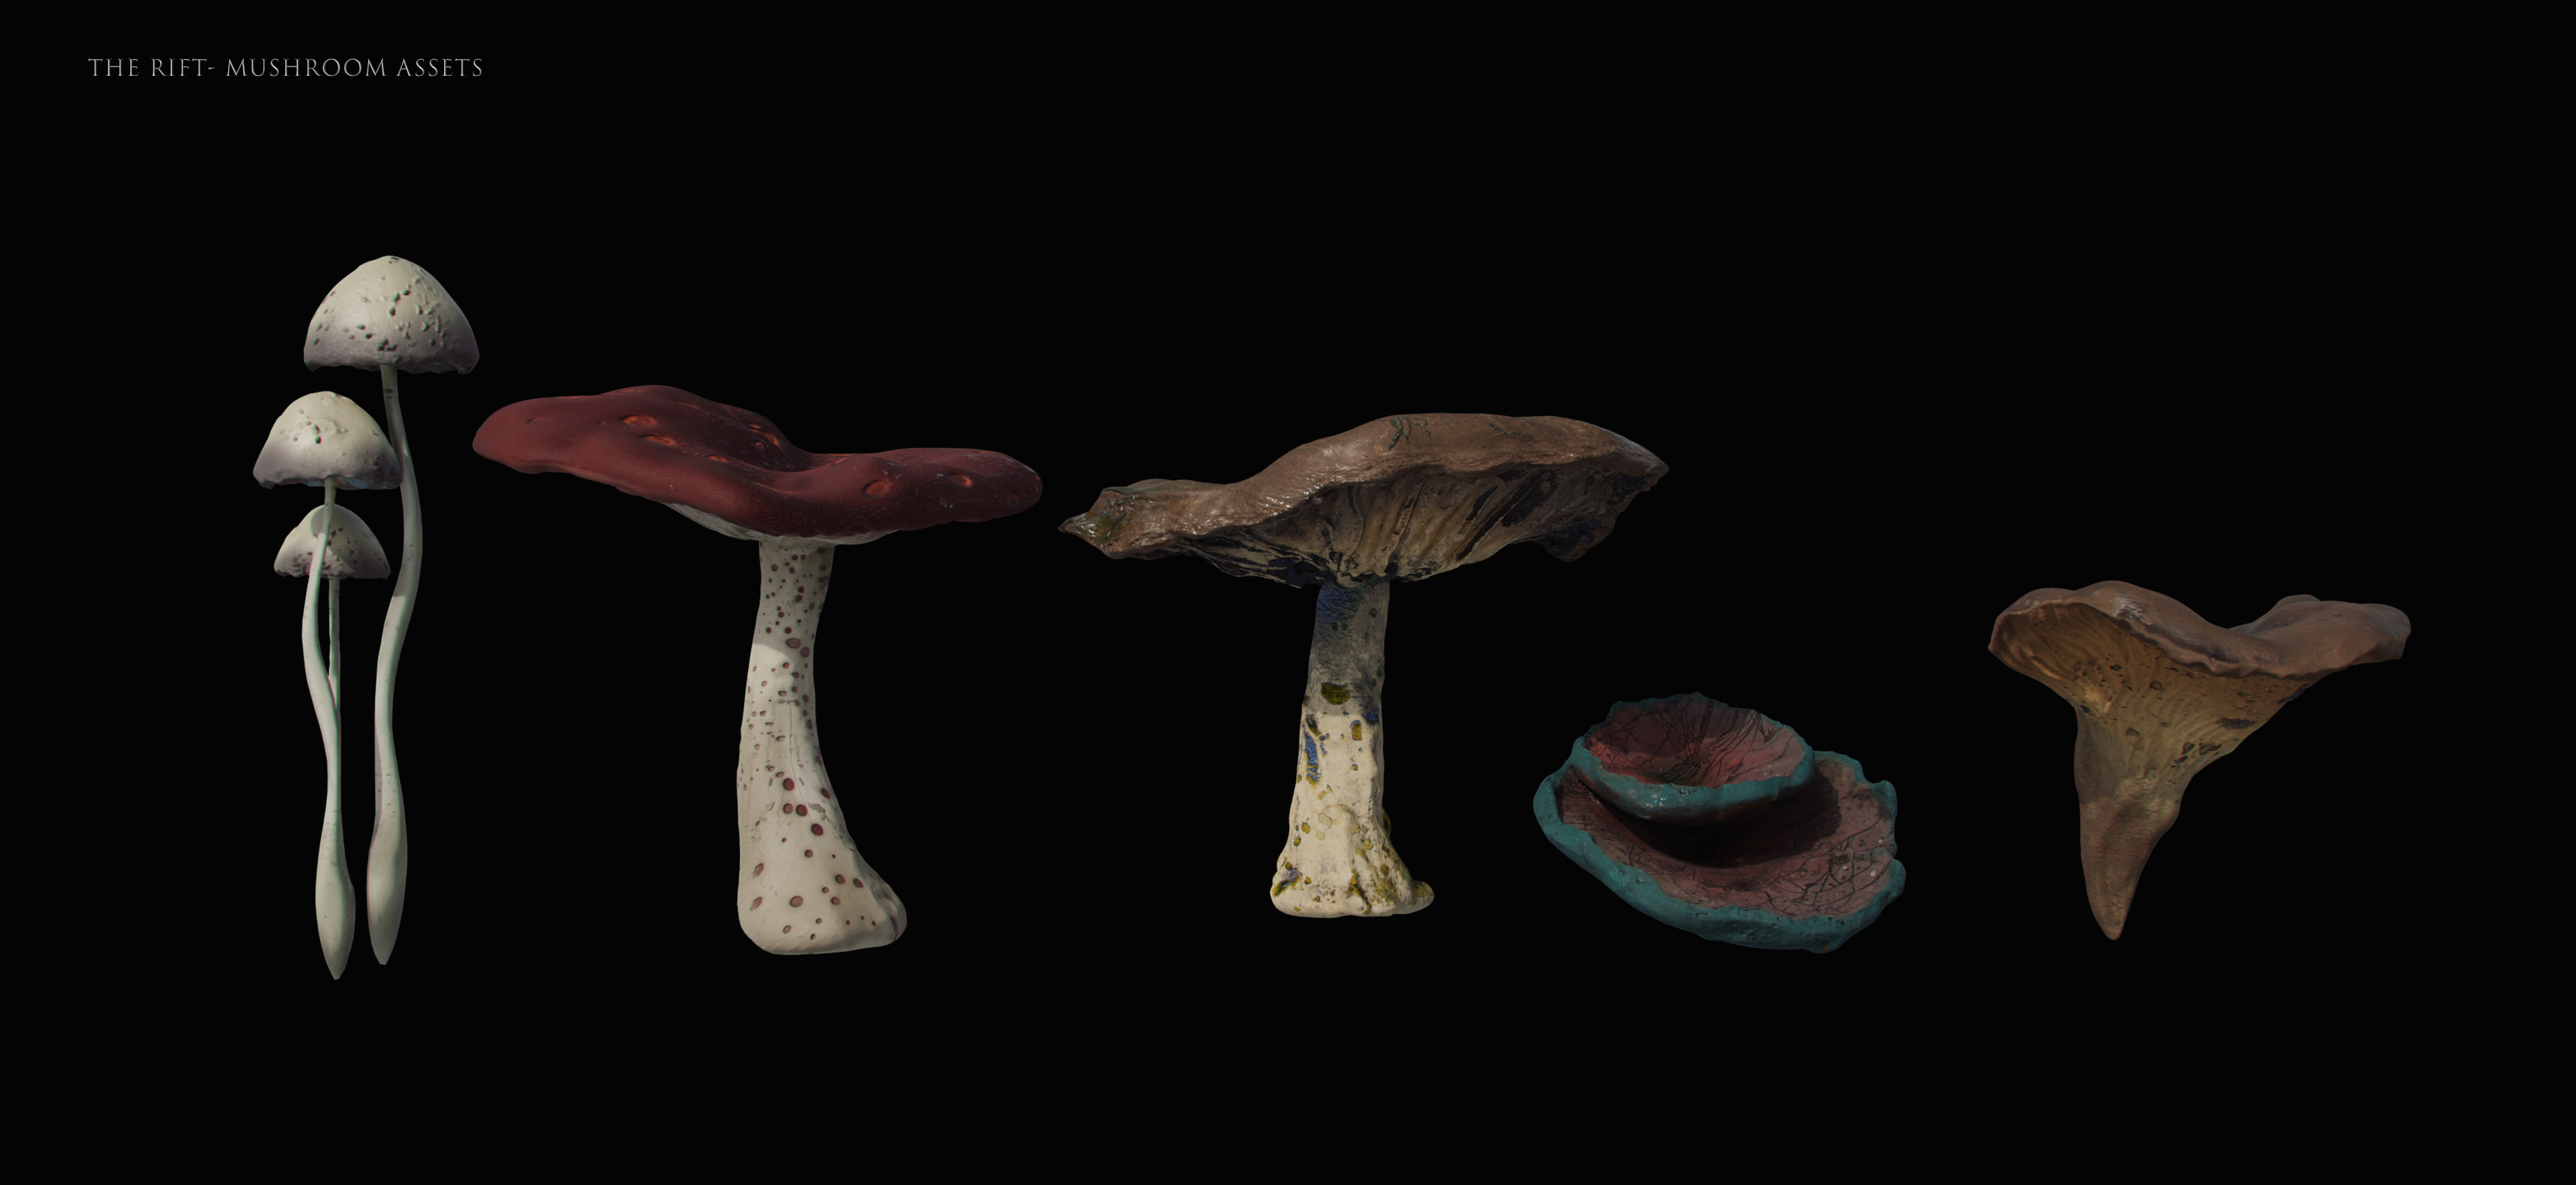 Mushroom assets created with 3D Coat